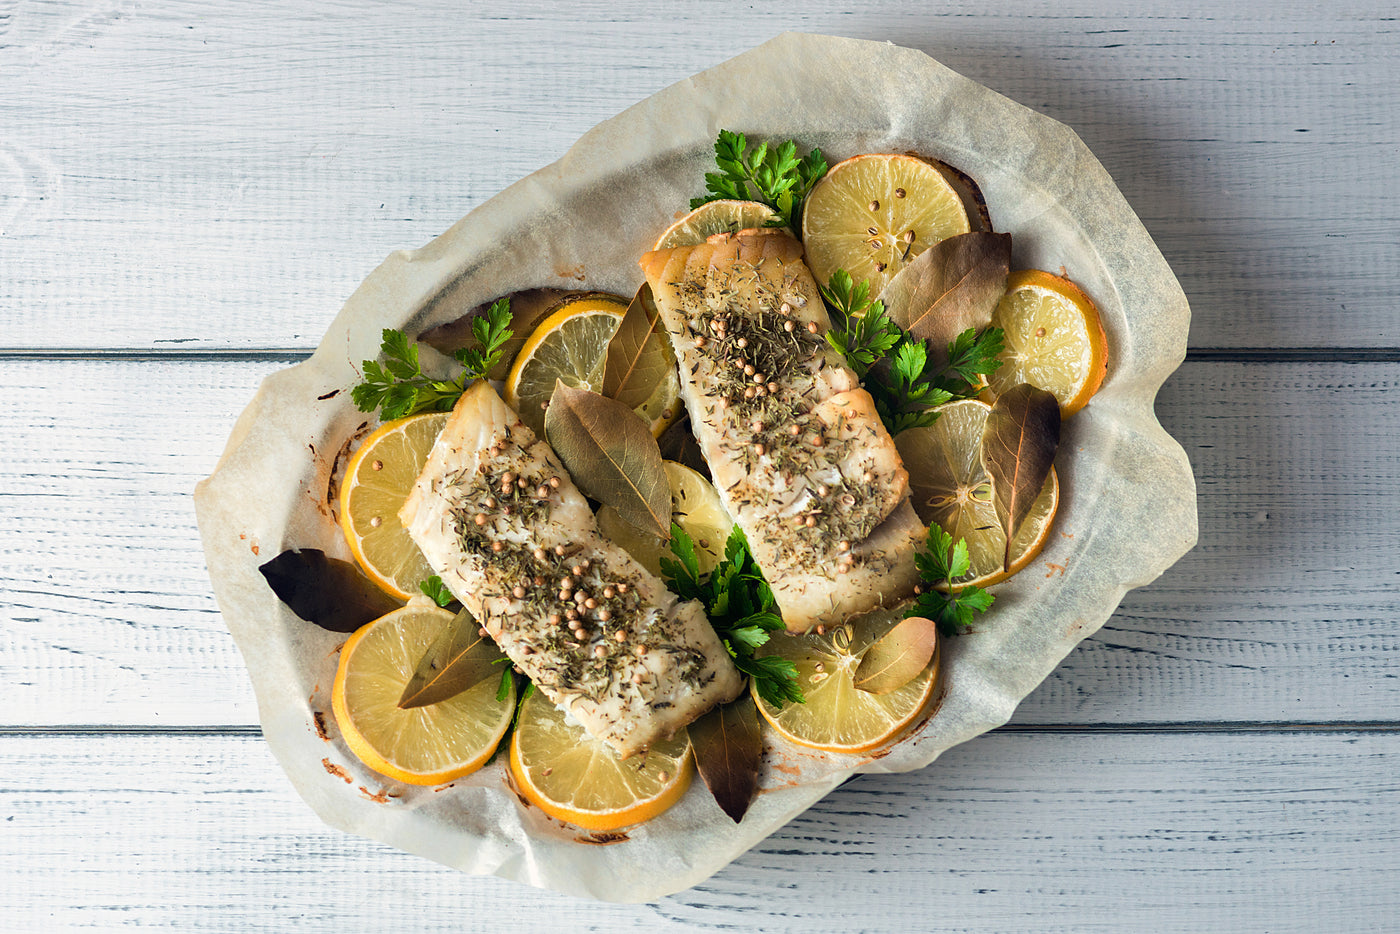 Lemon and Herb Baked Cod